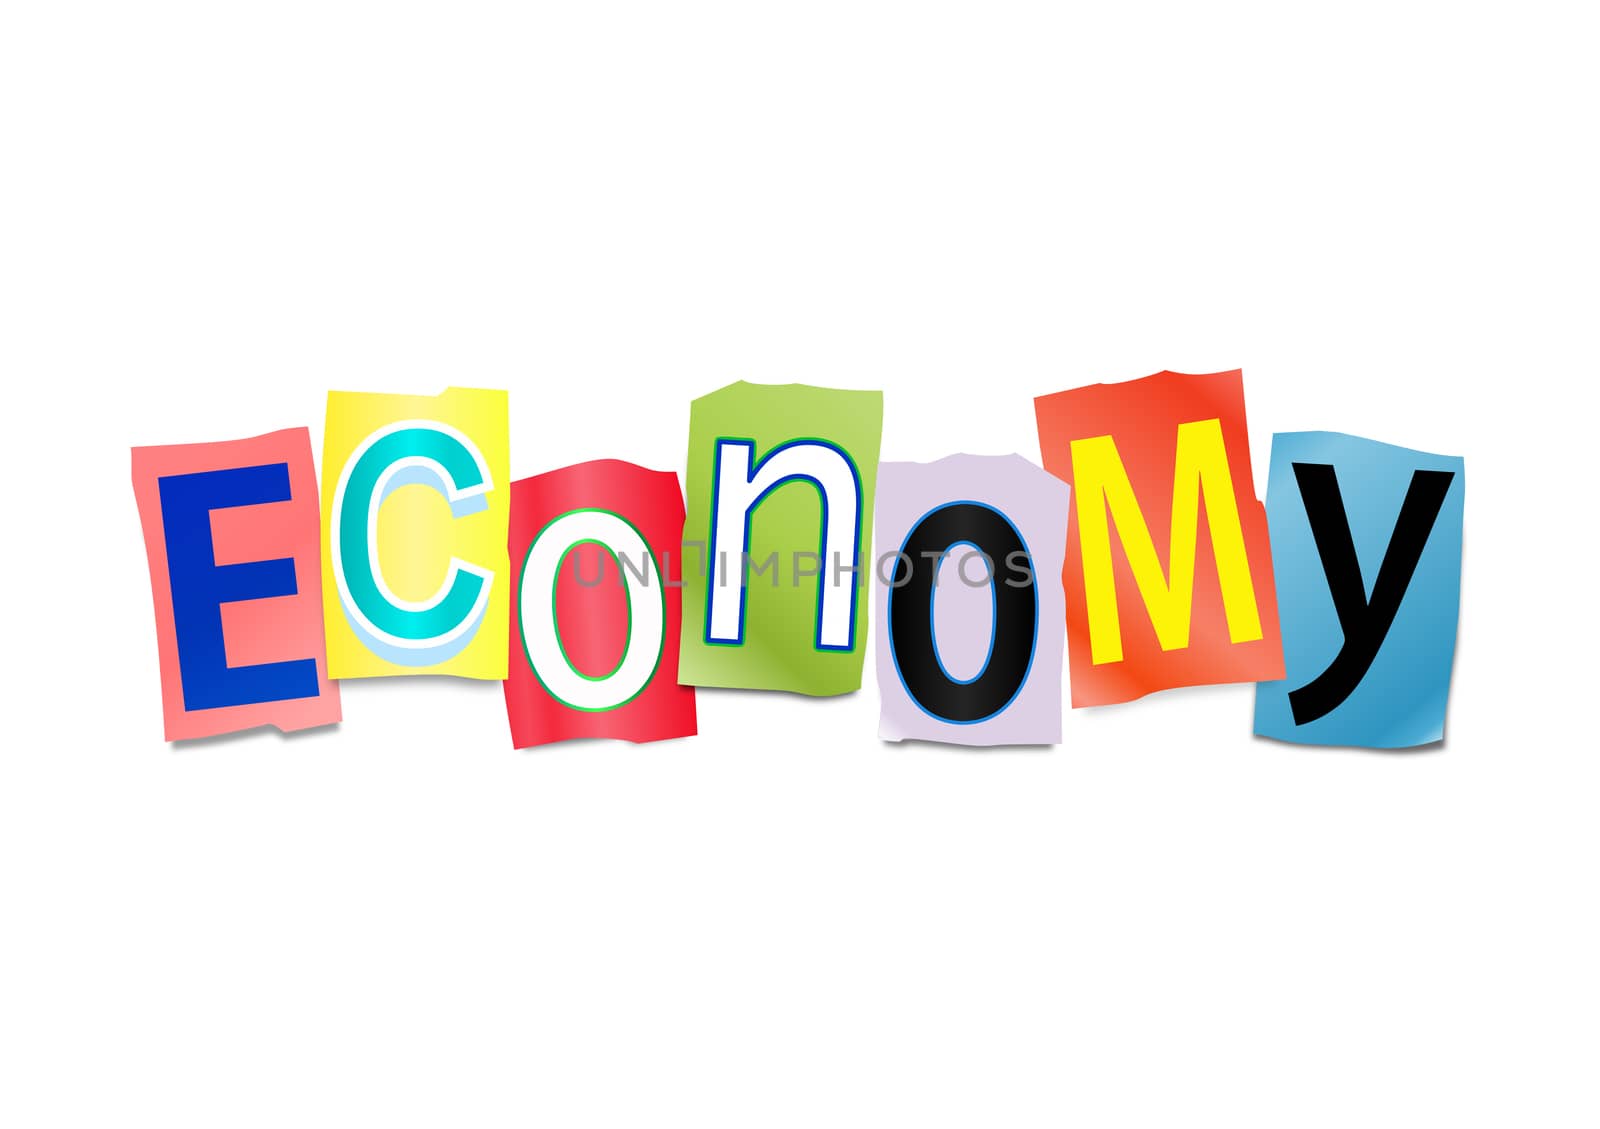 Illustration depicting a set of cut out printed letters arranged to form the word economy.